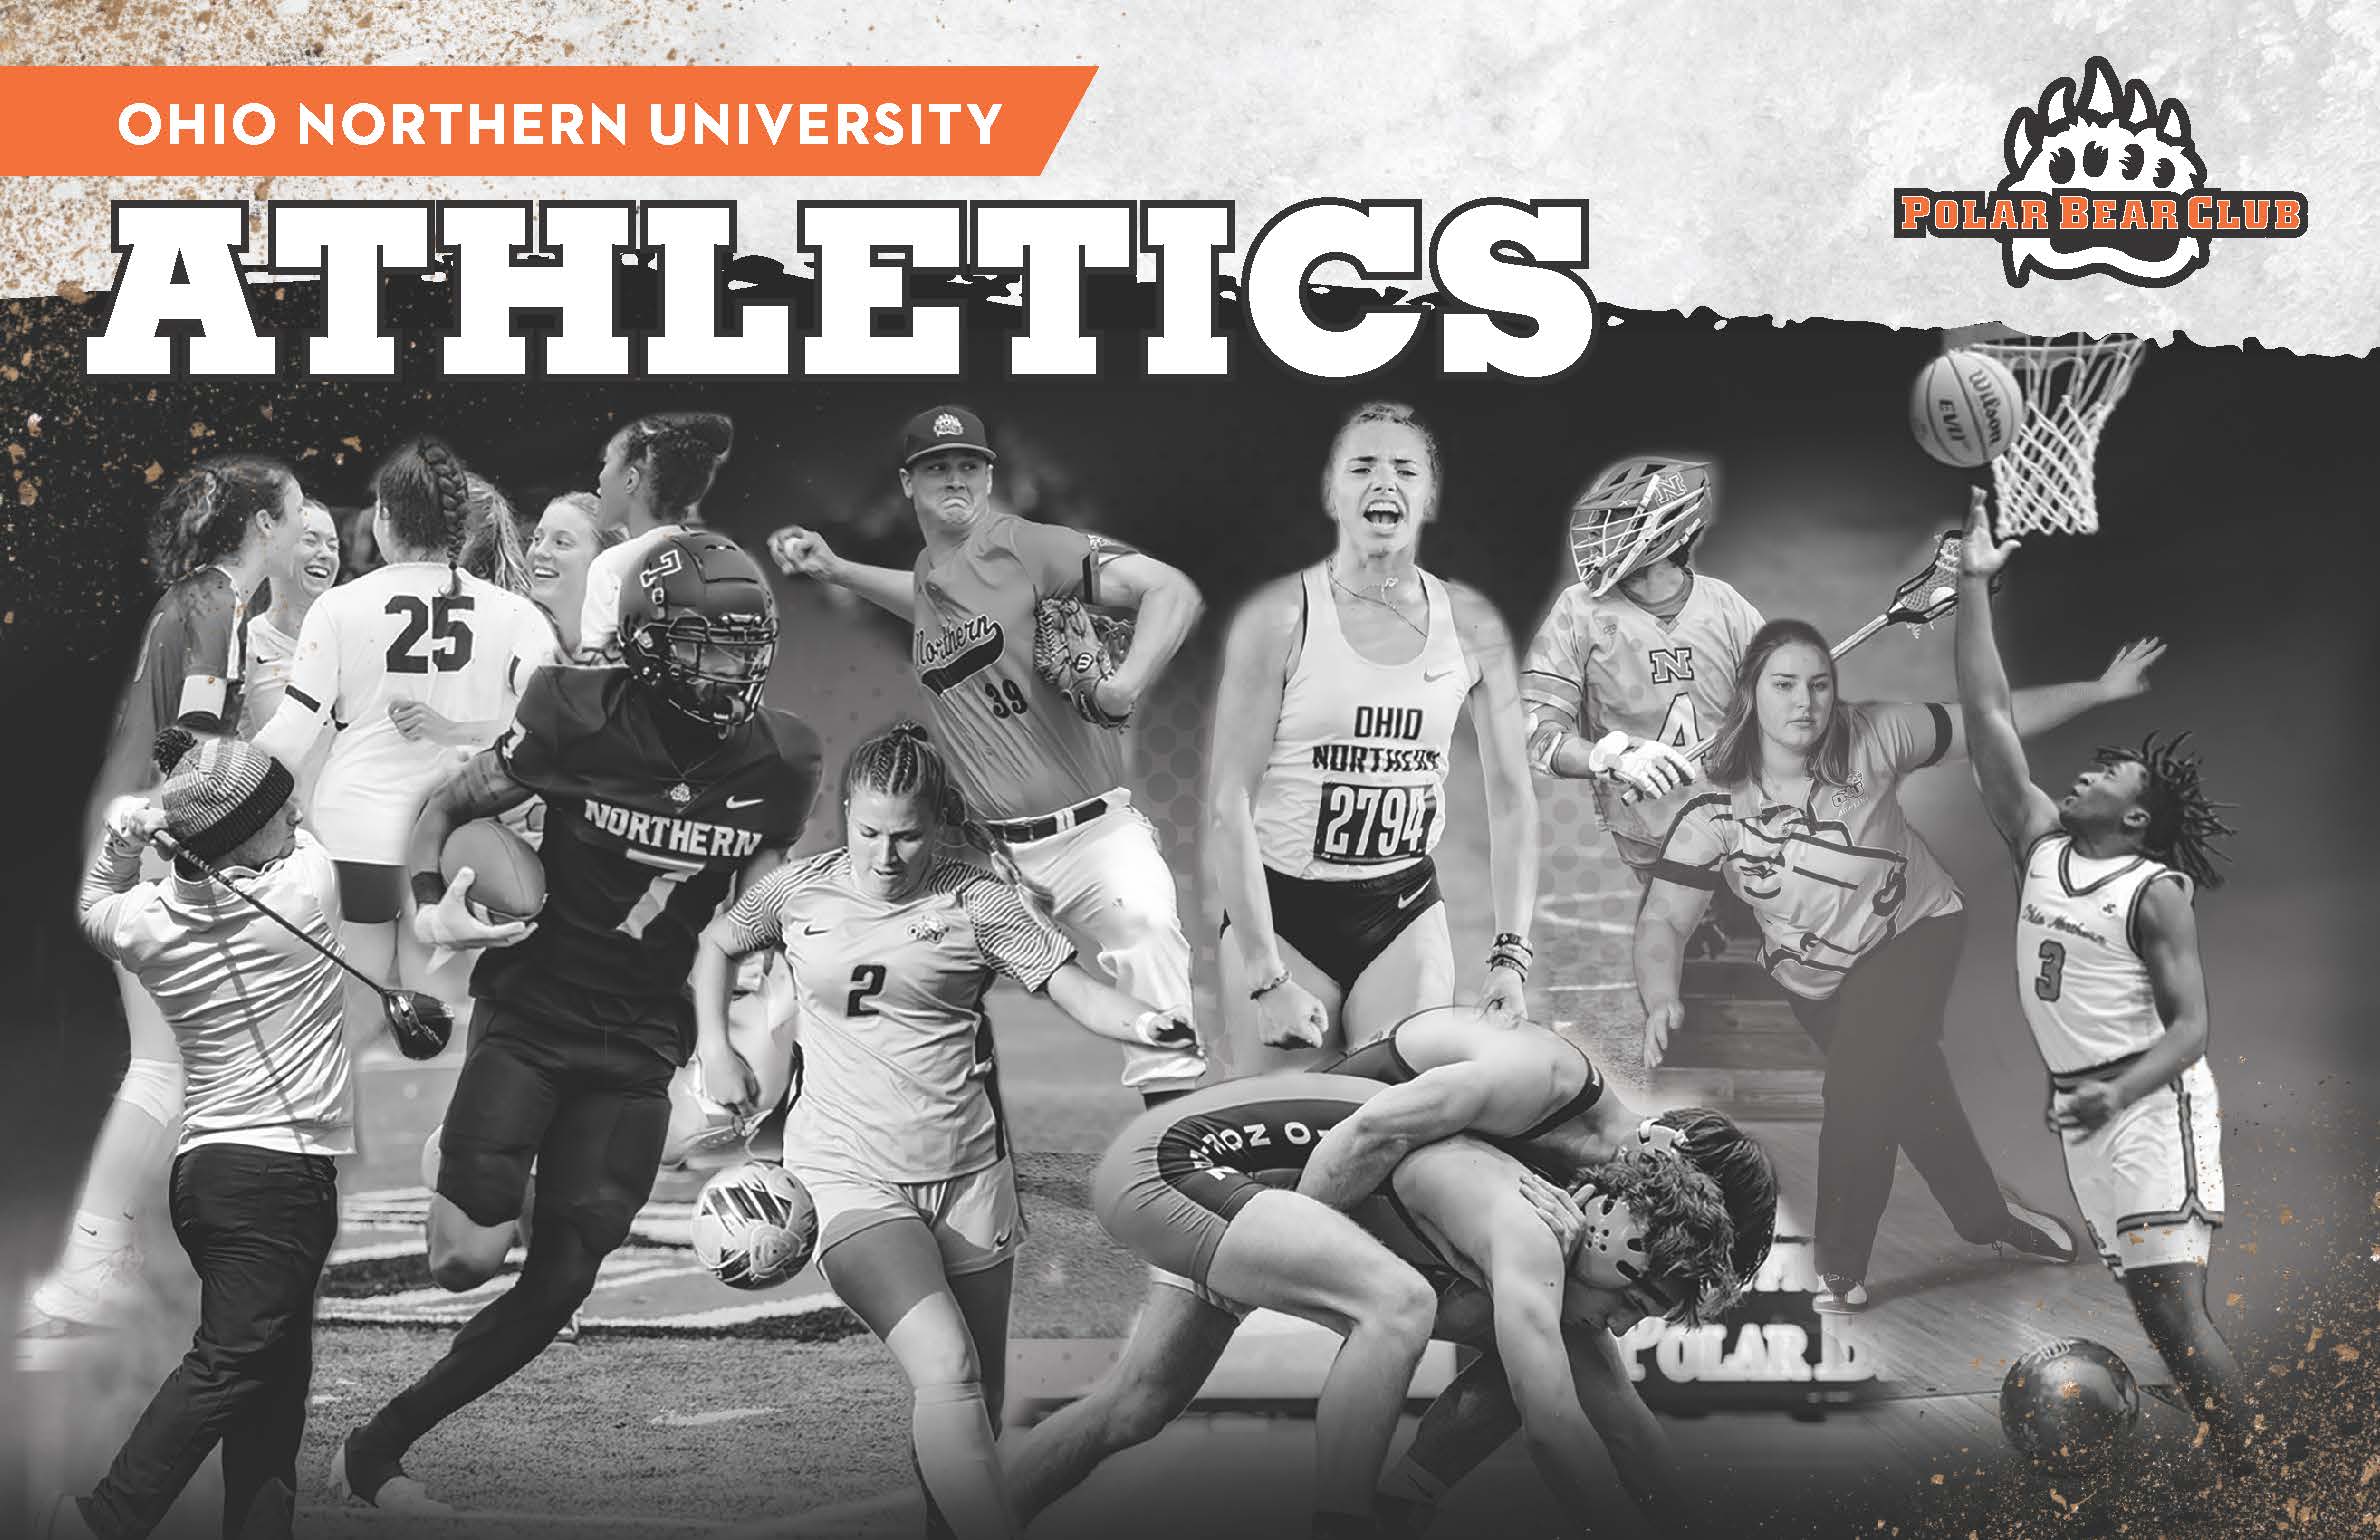 ONU Athletics; With your support, we will continue our tradition of excellence